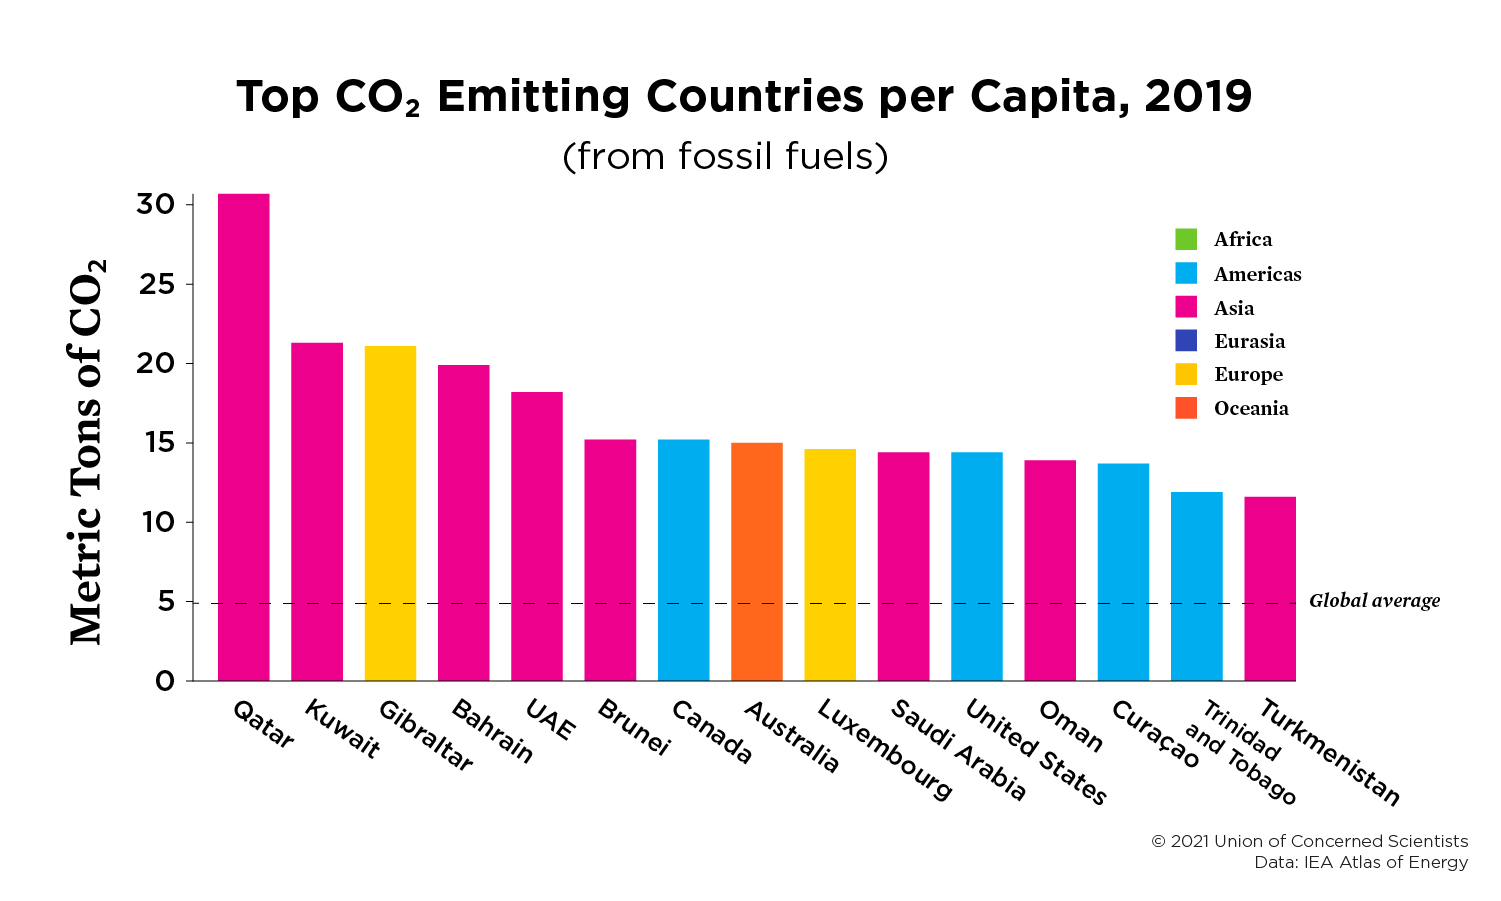 A chart showing the top CO2 emitting countries, per capita, as of 2019.